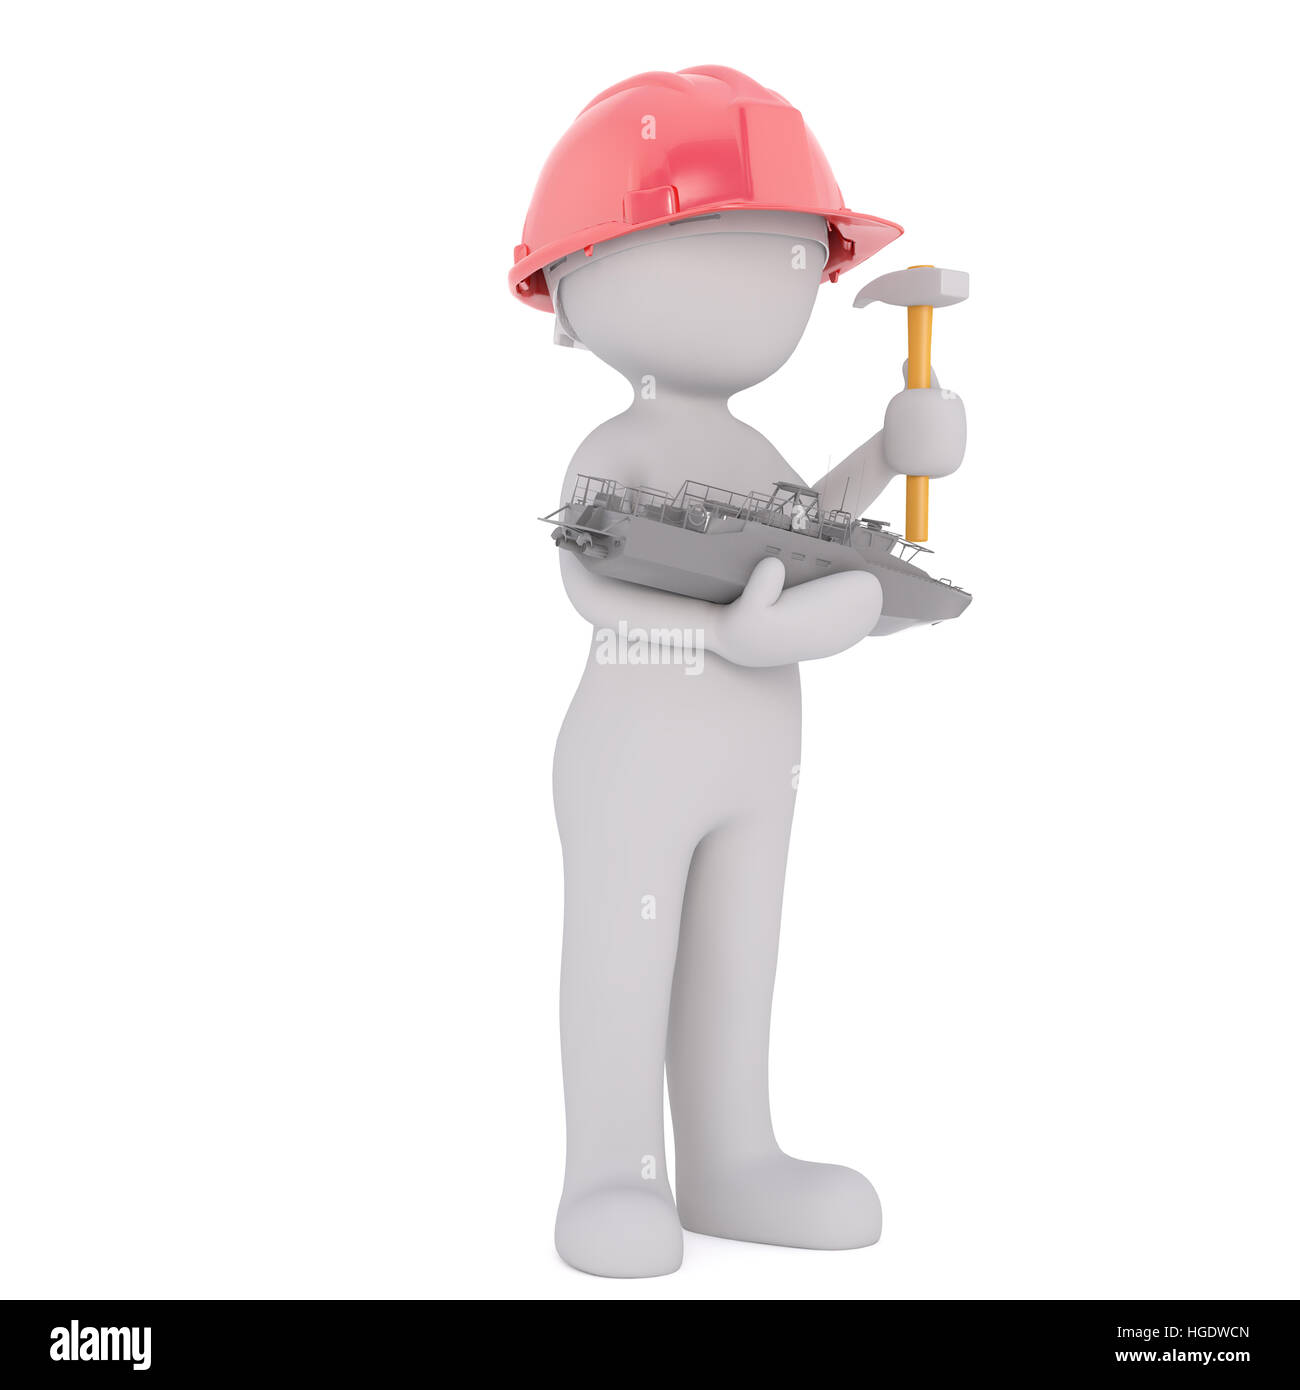 3D rendered figure holds hammer and mini trawler while wearing a red hardhat Stock Photo